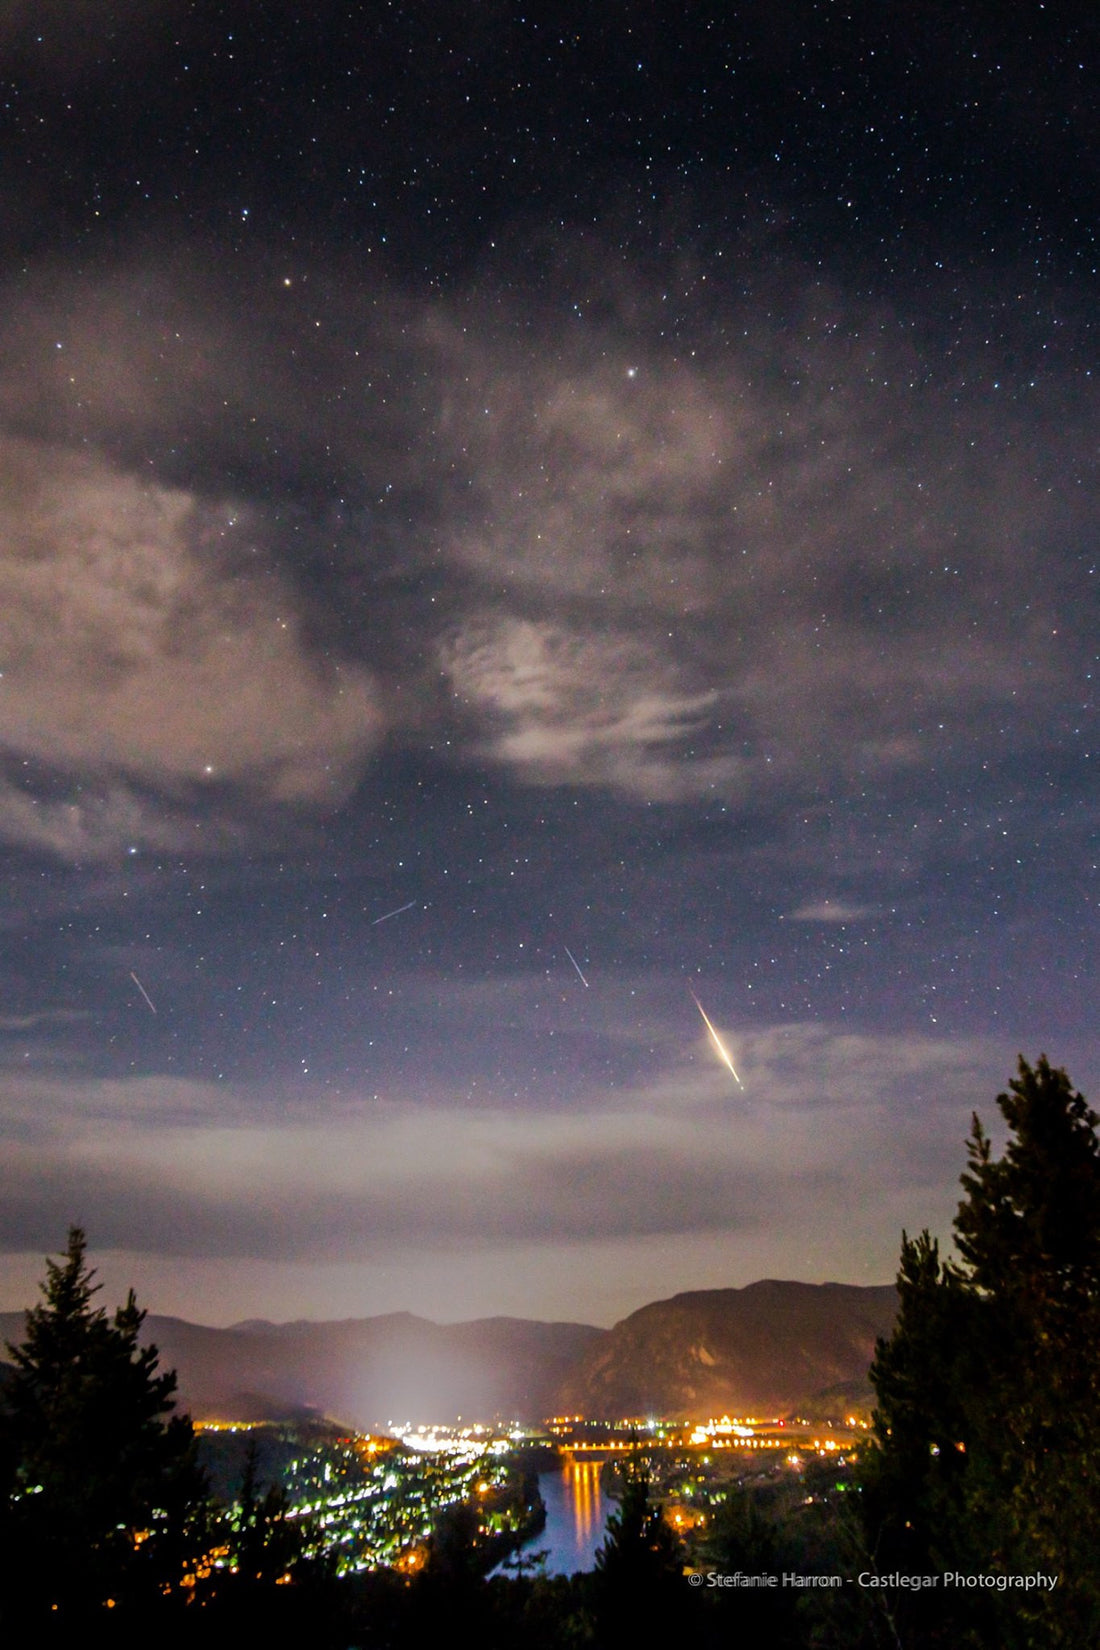 Perseid Meteor Shower and Recent Astrophotography Work